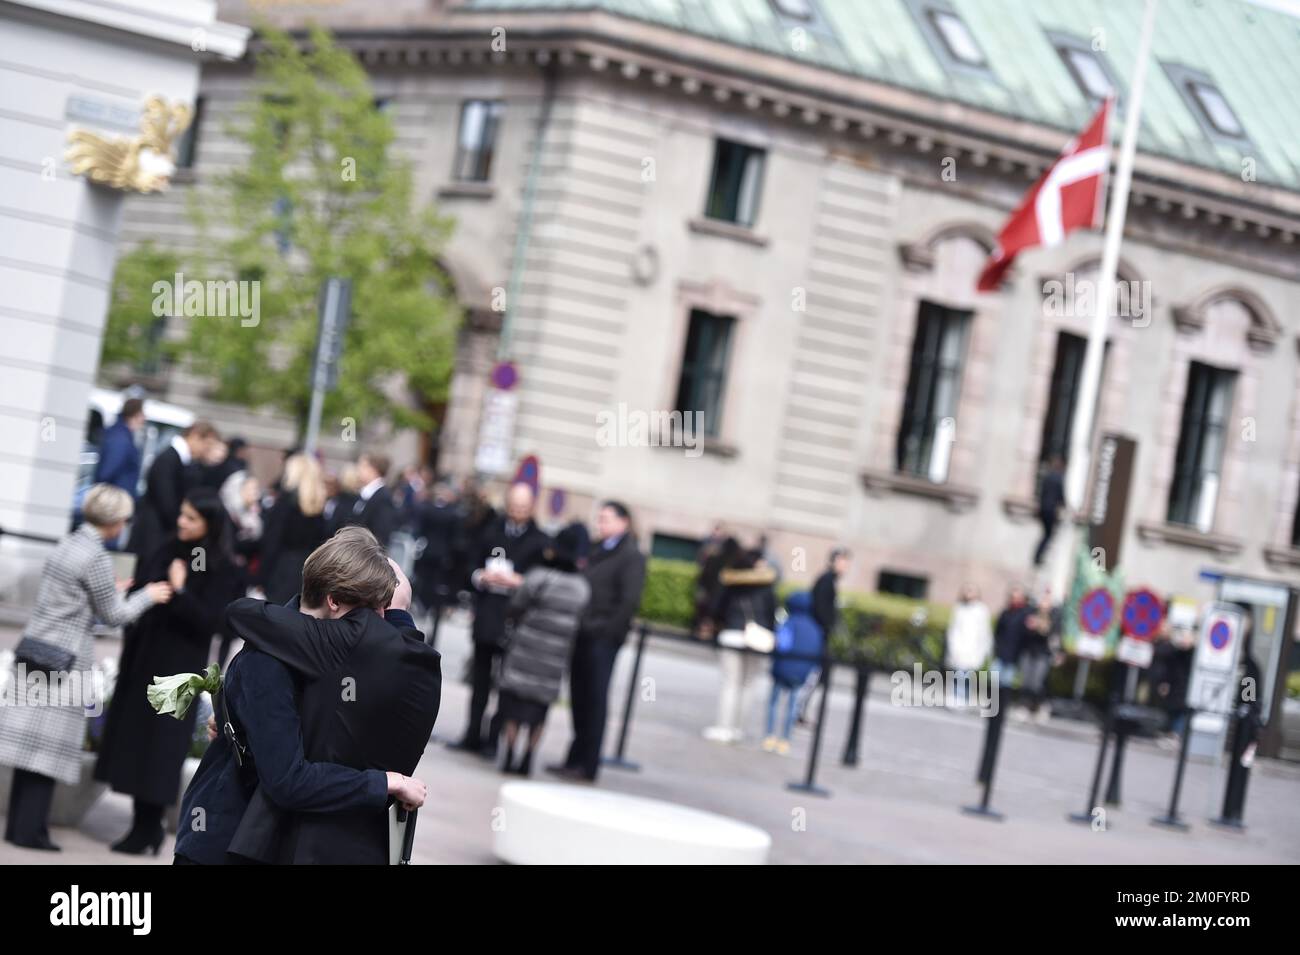 On May 4th 2019. Funeral service for the three children of CEO of clothing brand Bestseller, Anders Holch Povlsen and wife Anne, who were victims of the Sri Lanka terror attack on April 21st. The service was held at Aarhus Cathedral. Among the attending were TRH Crown Prince Frederik, Crown Princess Mary, their four children Prince Christian, Princess Isabella, Prince Vincent and Princess Josephine, Prime Minister Lars Løkke Rasmussen, actor Nikolaj Lie Kaas, and several other cultural and political personas. FOR VIDEO CONTACT scanpix@ritzau.dk.. (Foto: Mads Claus Rasmussen/Ritzau Scanpix) Stock Photo